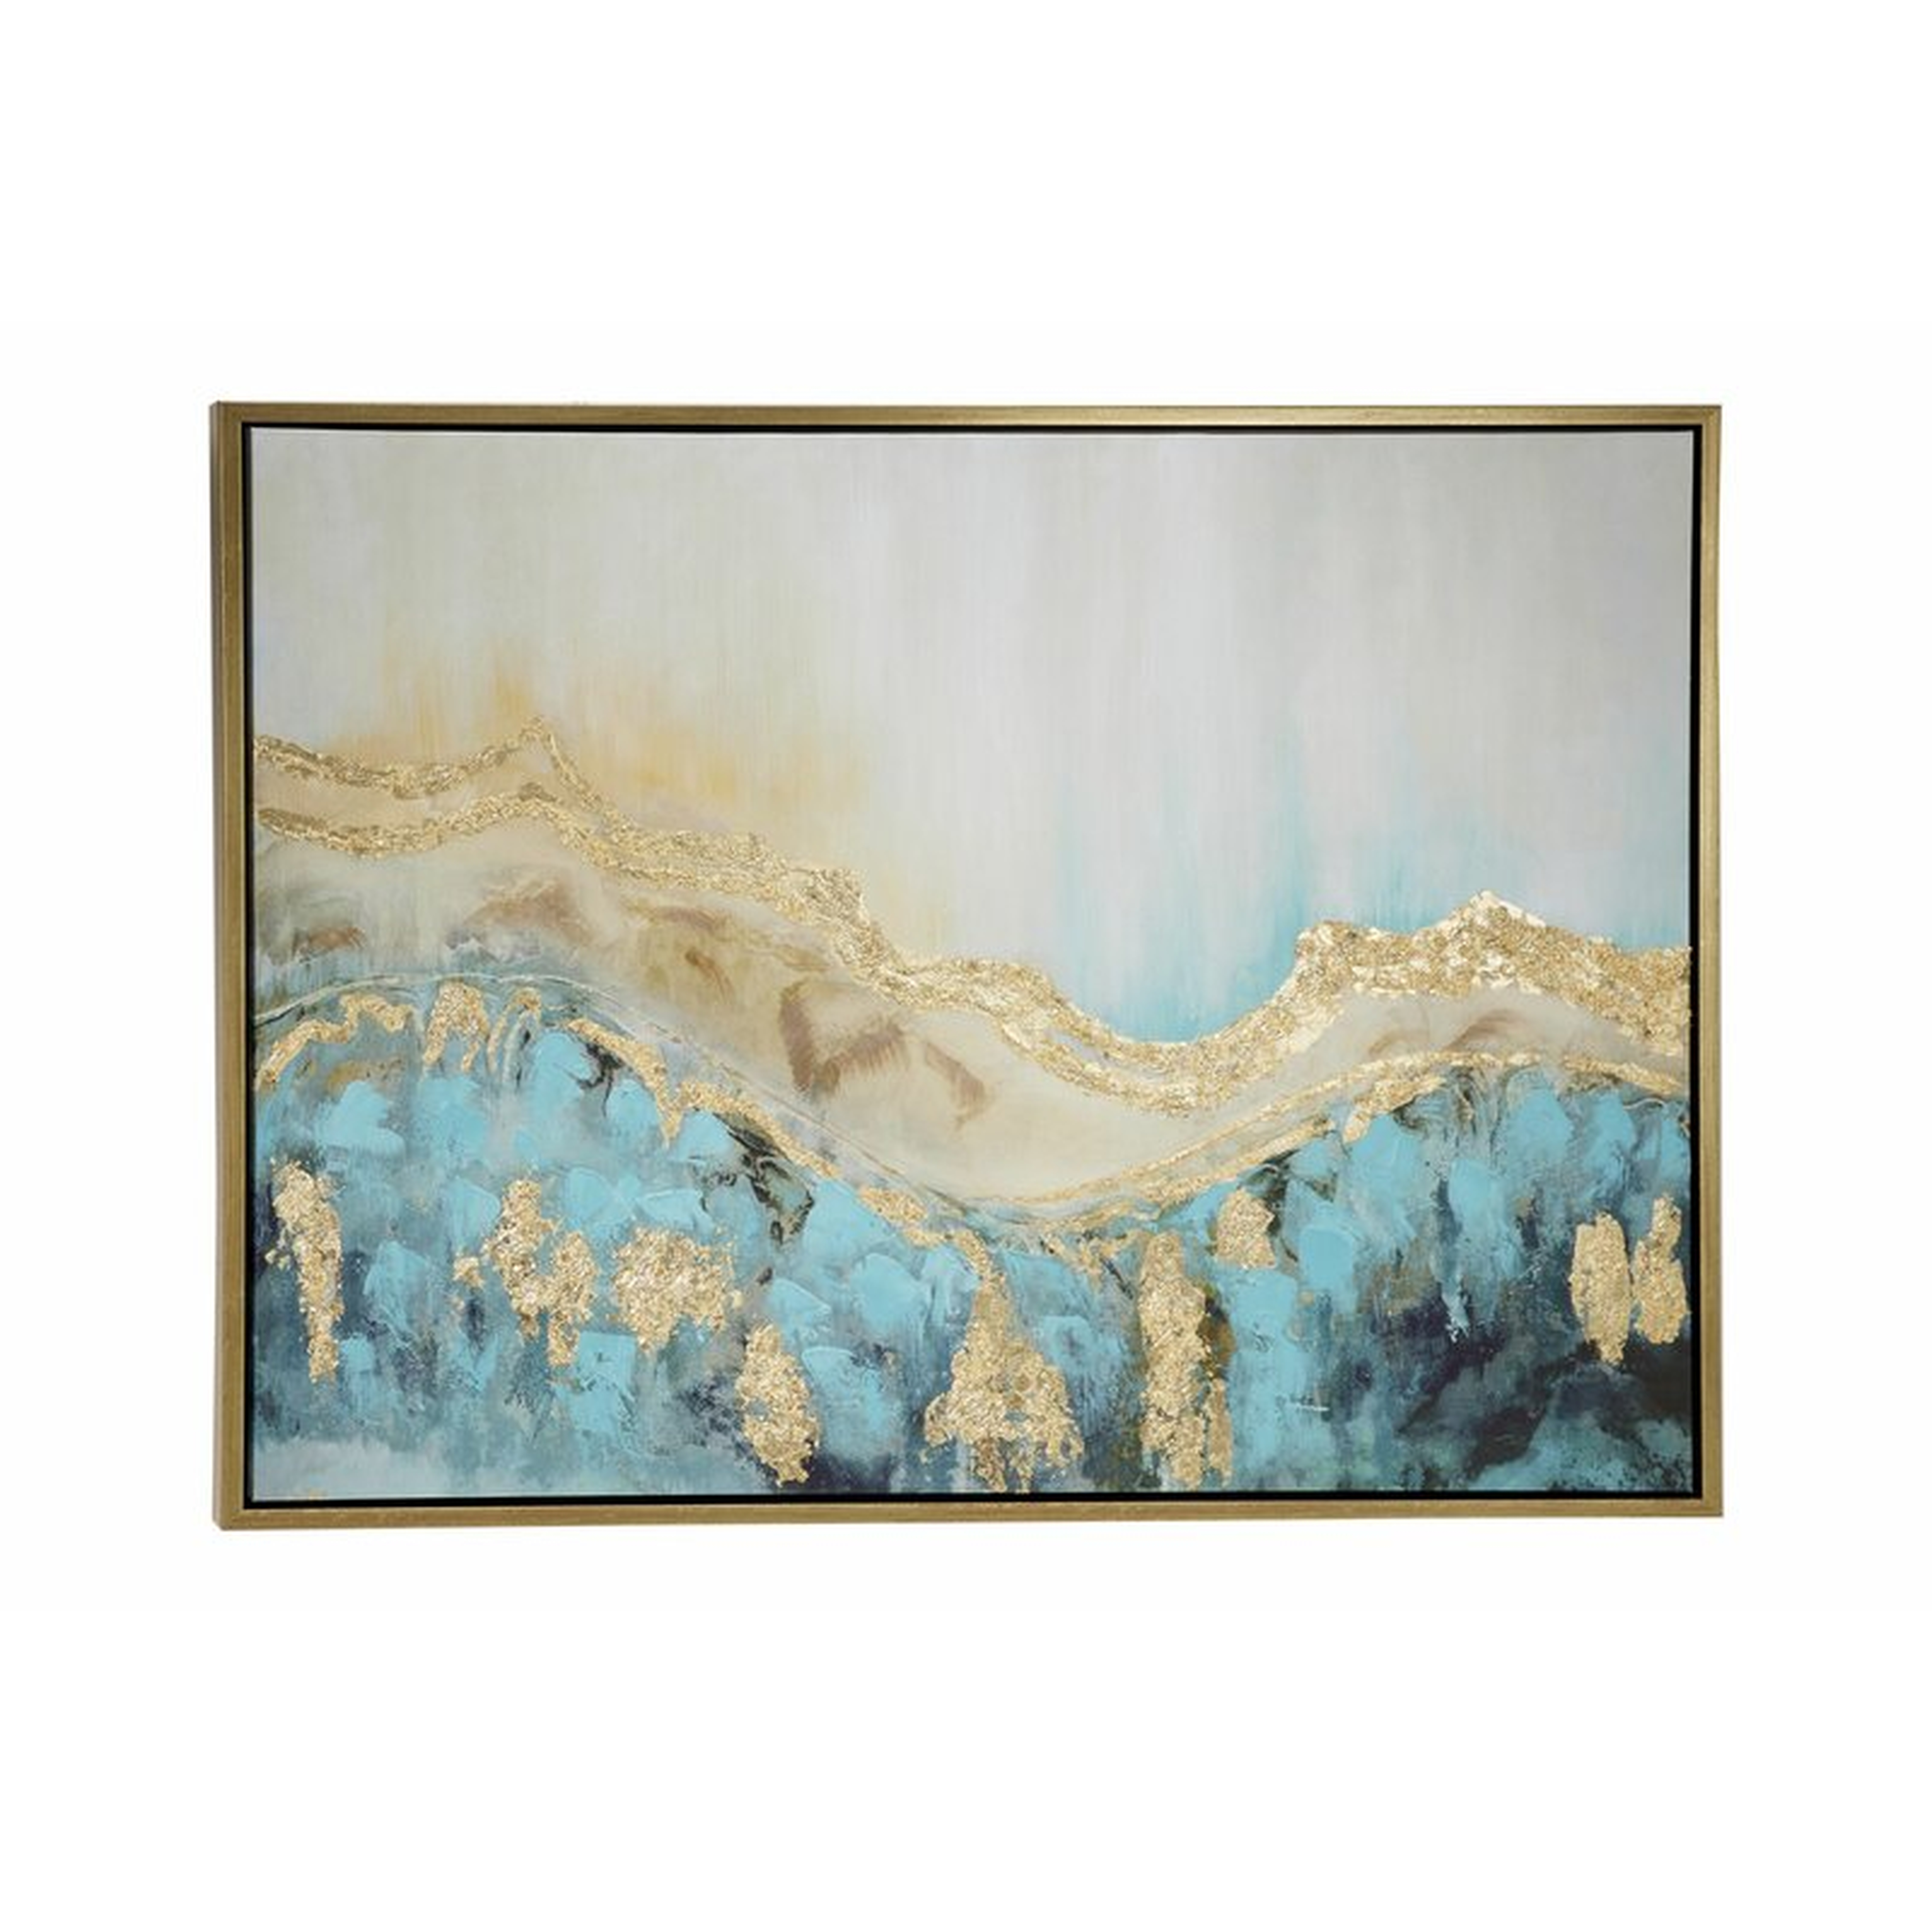 47.5” x 35.5” Large Turquoise & Gold Contemporary Abstract Painting in Metallic Gold Wood Frame - Wayfair